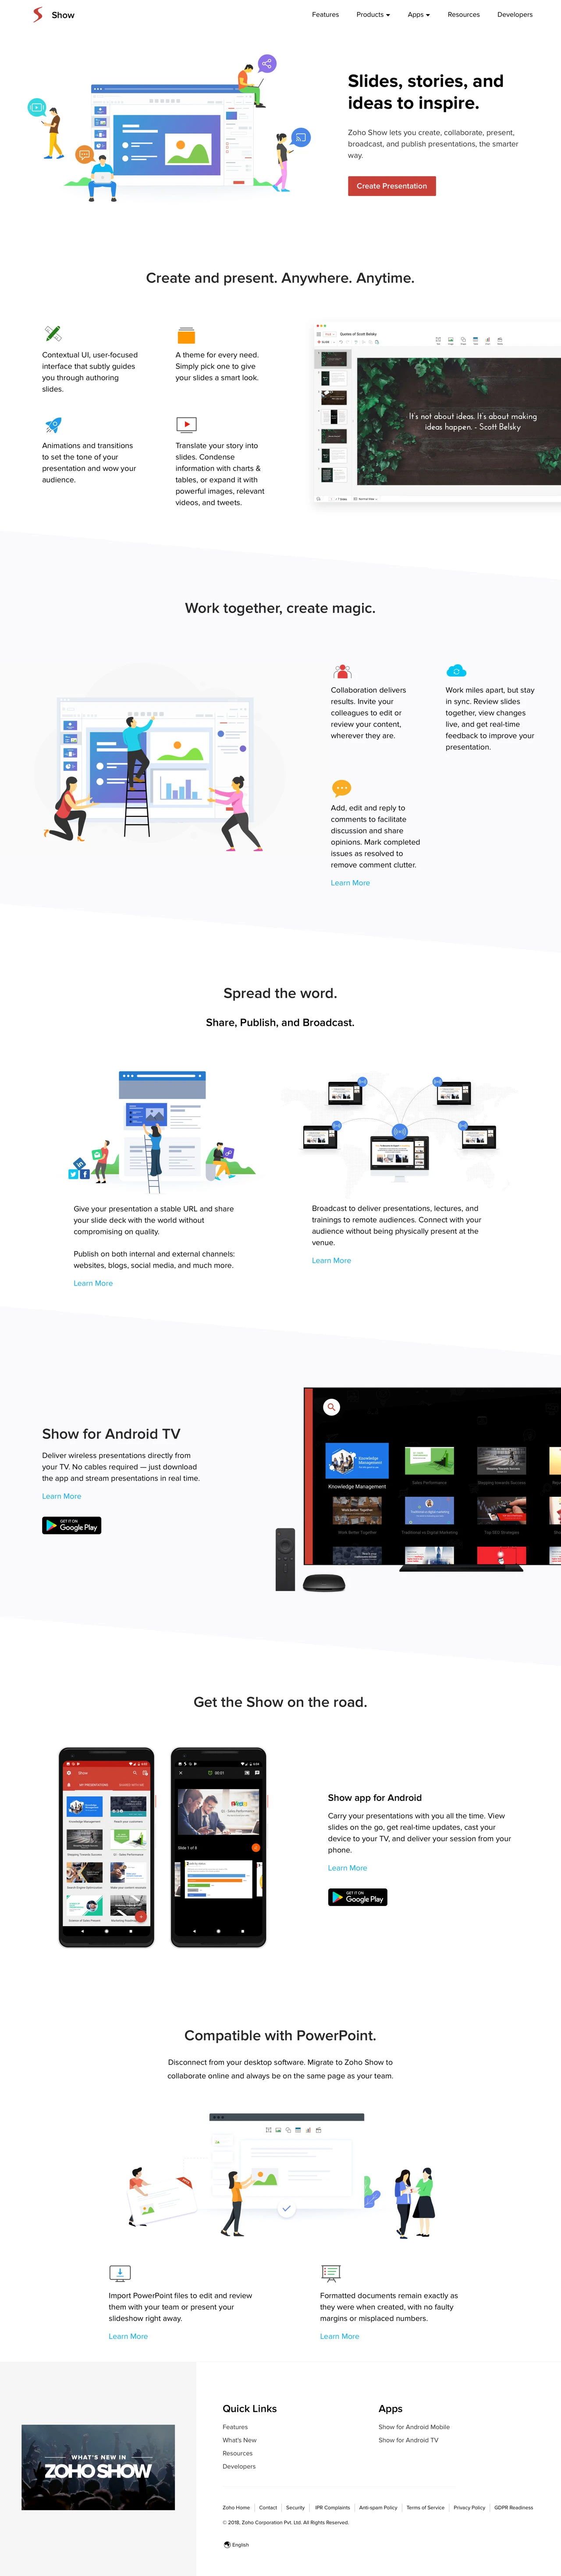 Zoho Show Landing Page Example: Zoho Show is a free online presentation software that lets you create, collaborate, publish, and broadcast presentations from any device, quick and easy.